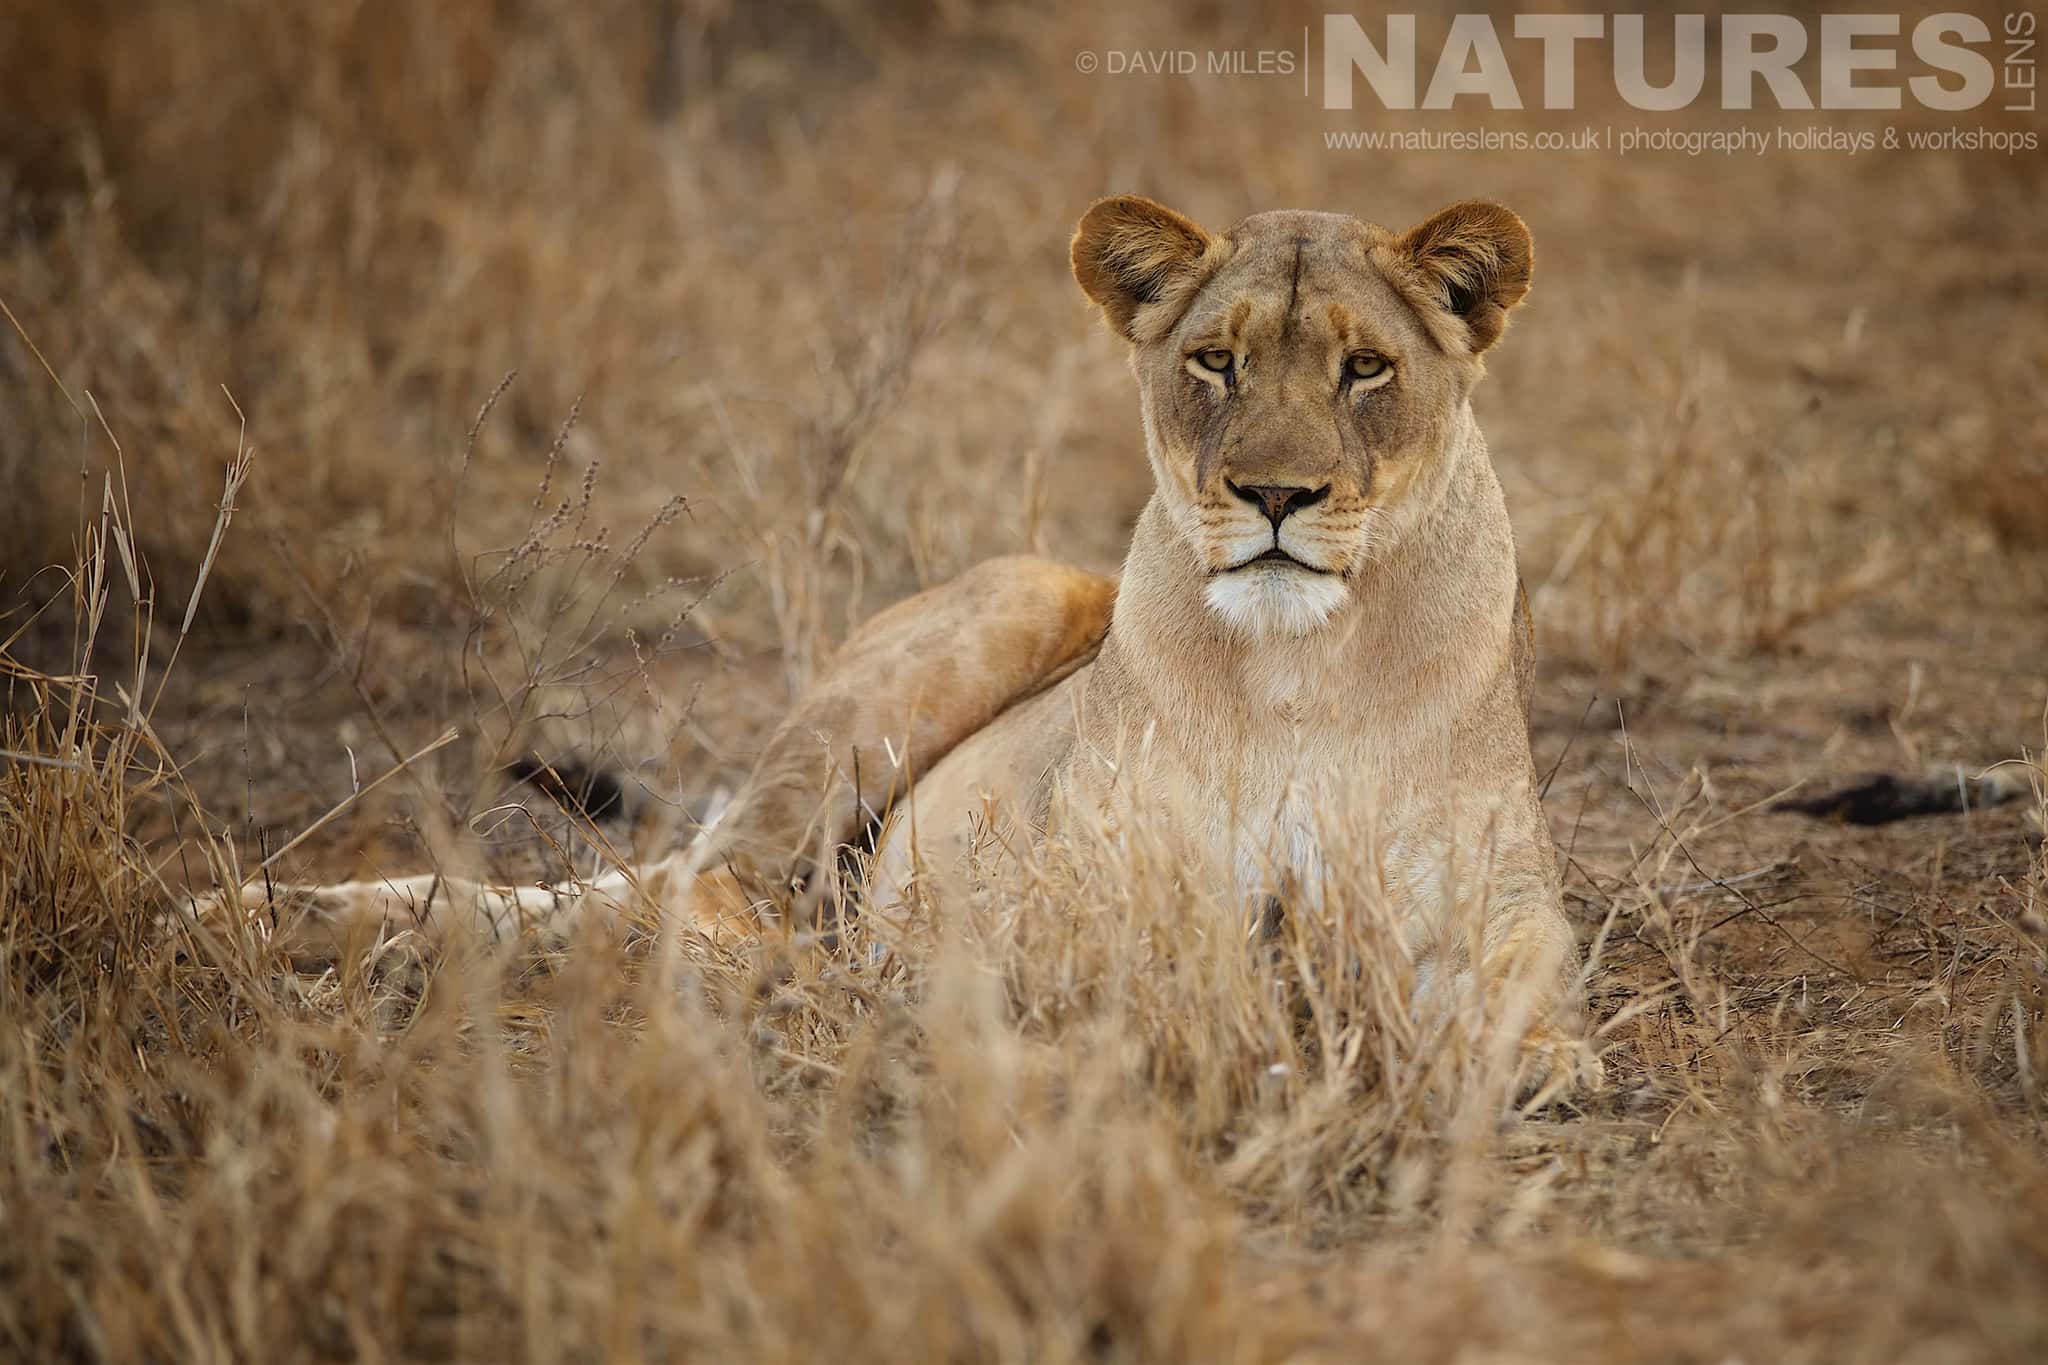 A Solo Lioness Rests In The Grass One Of The Species That Makes Up The Awe Inspiring Wildlife Of Zimanga